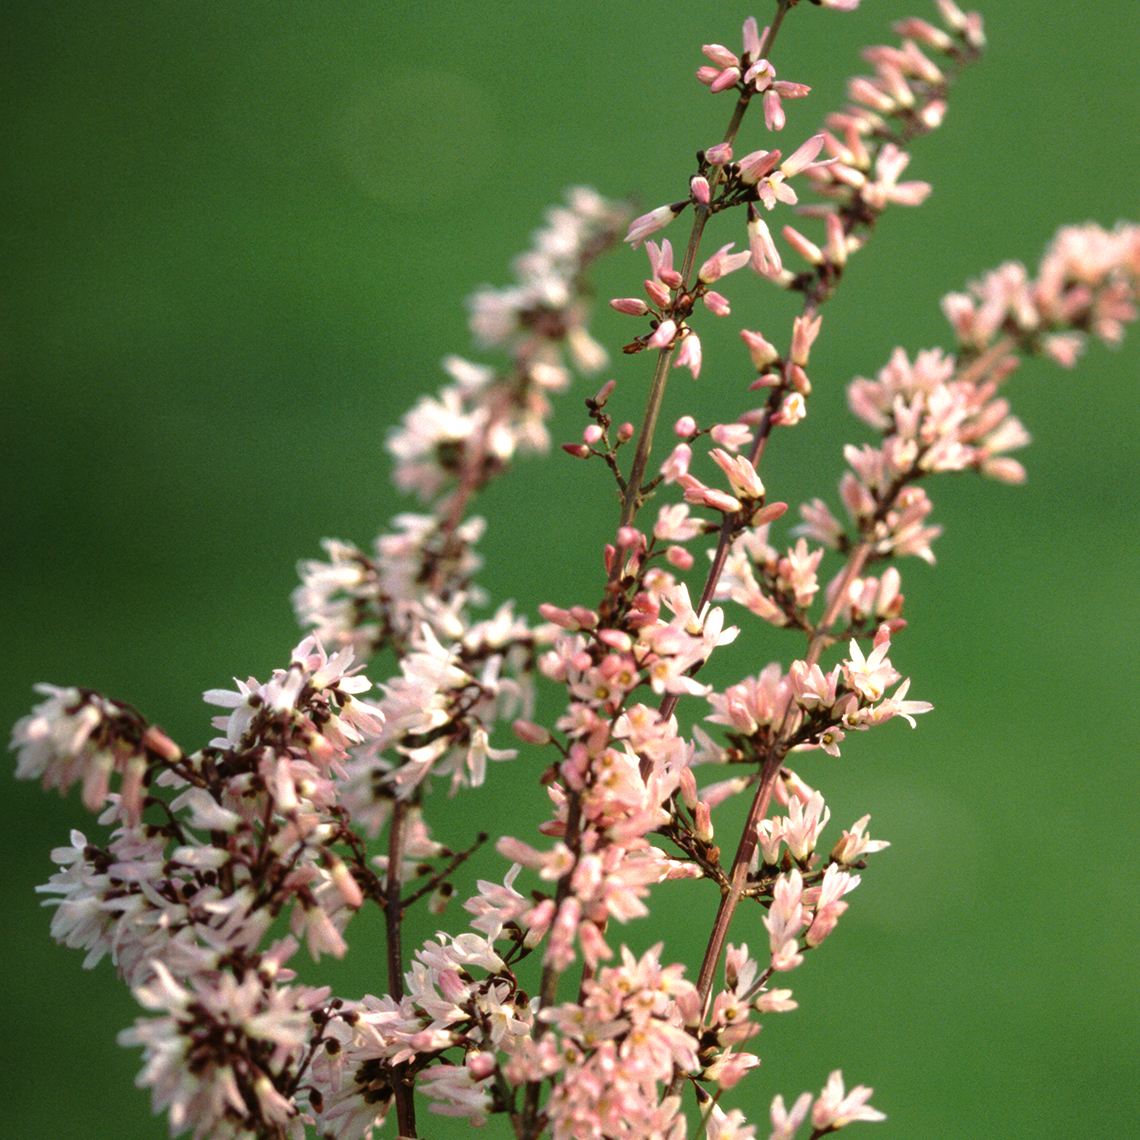 Abeliophyllum Roseum with pink blooms on thin branches